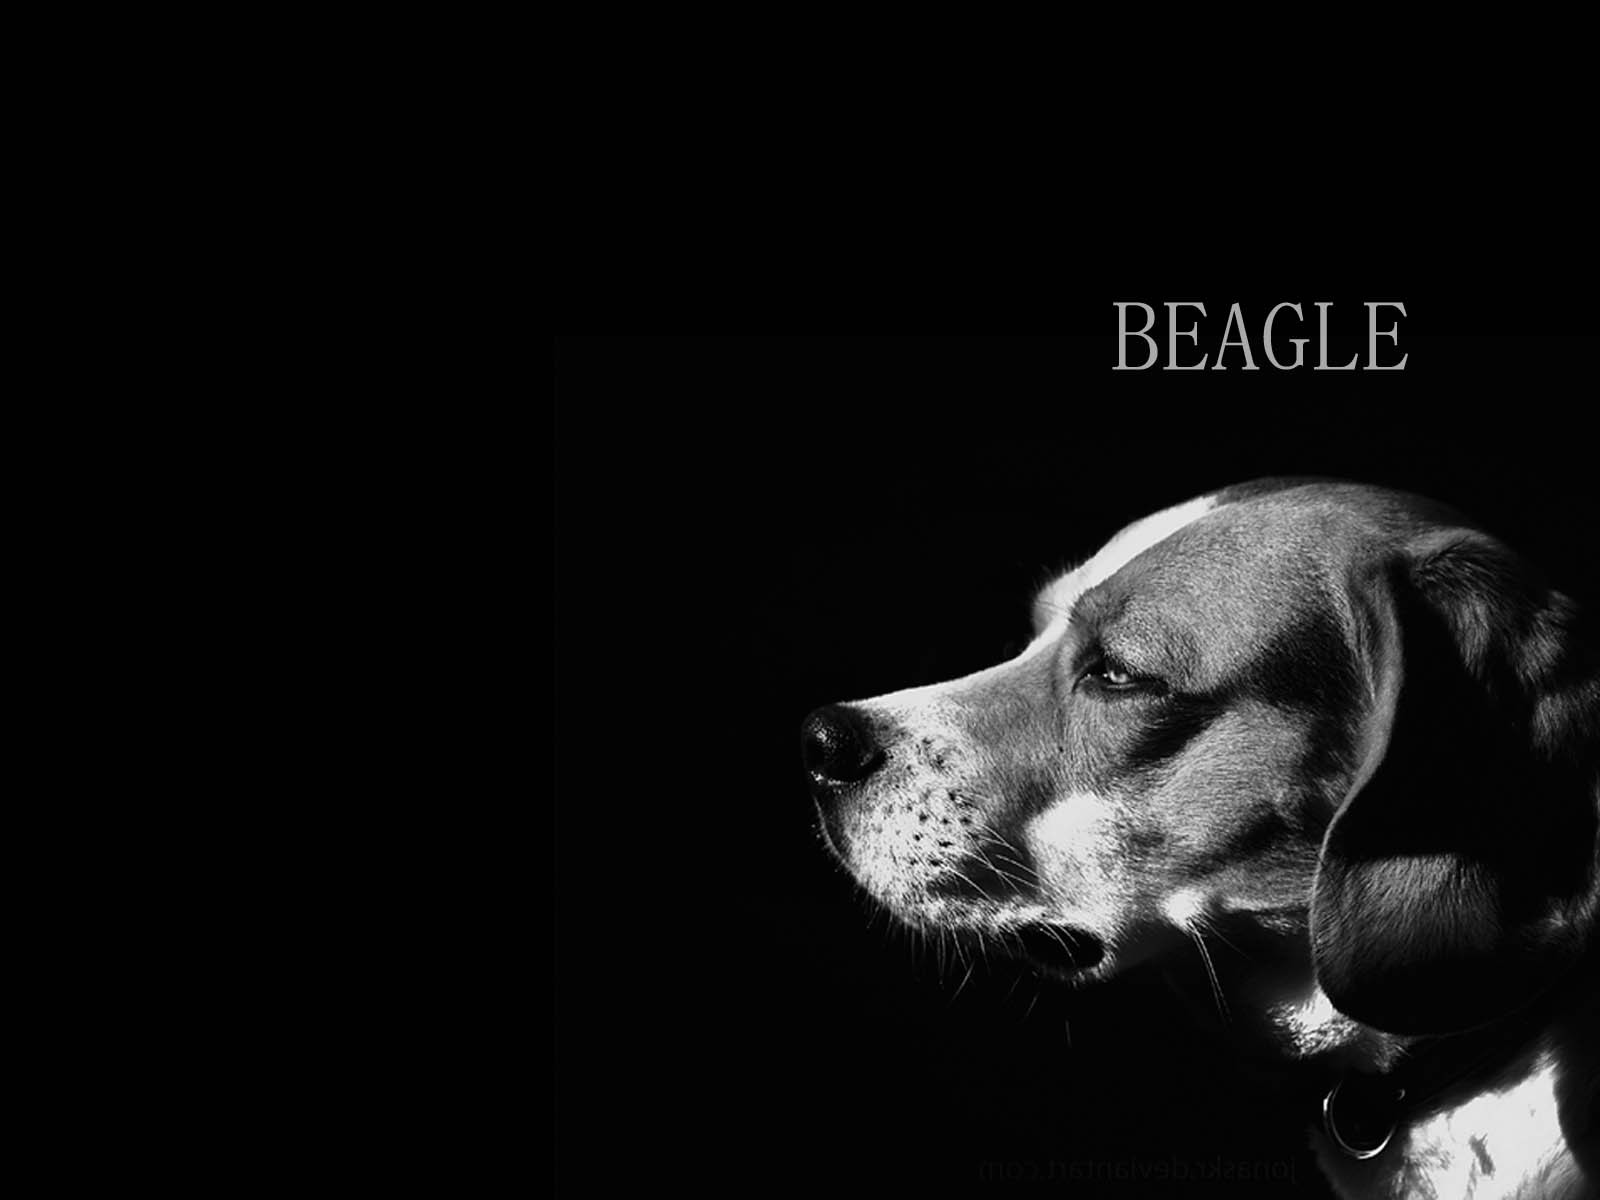 Beagle Dog Black And White Picture Wallpaper Image